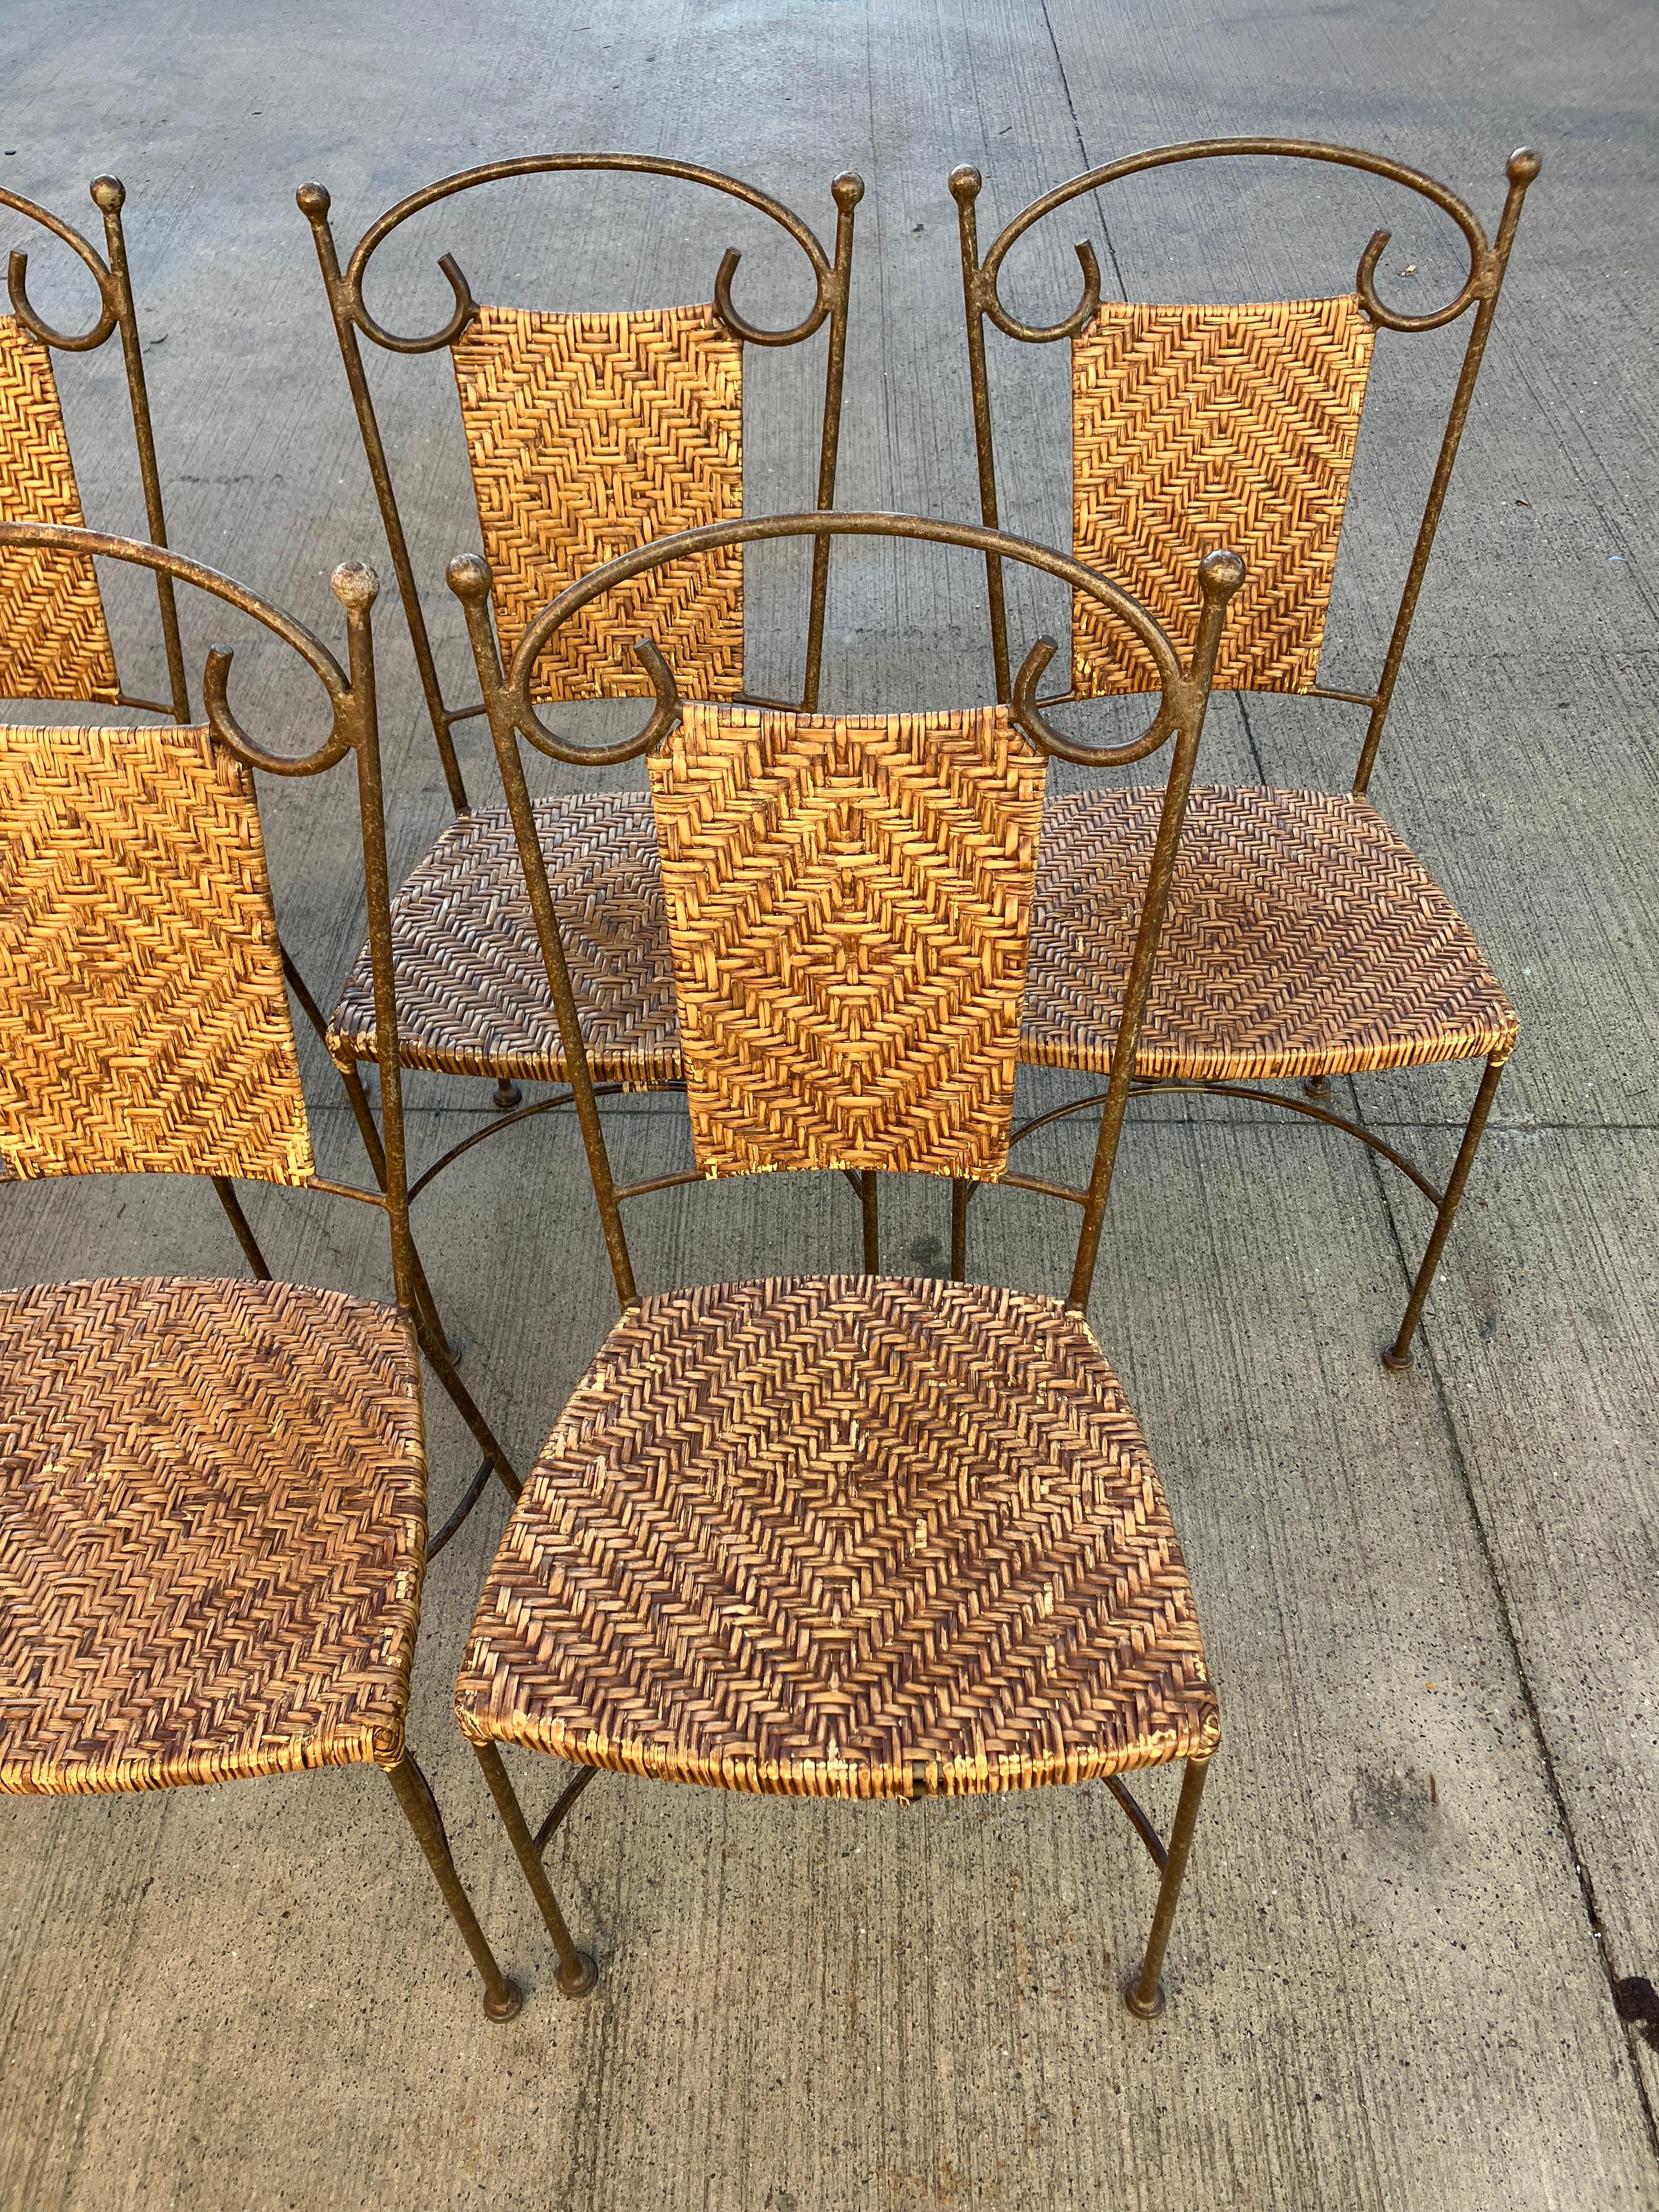 Vintage wrought Iron Dining Chairs with Wicker Seating x 6 5